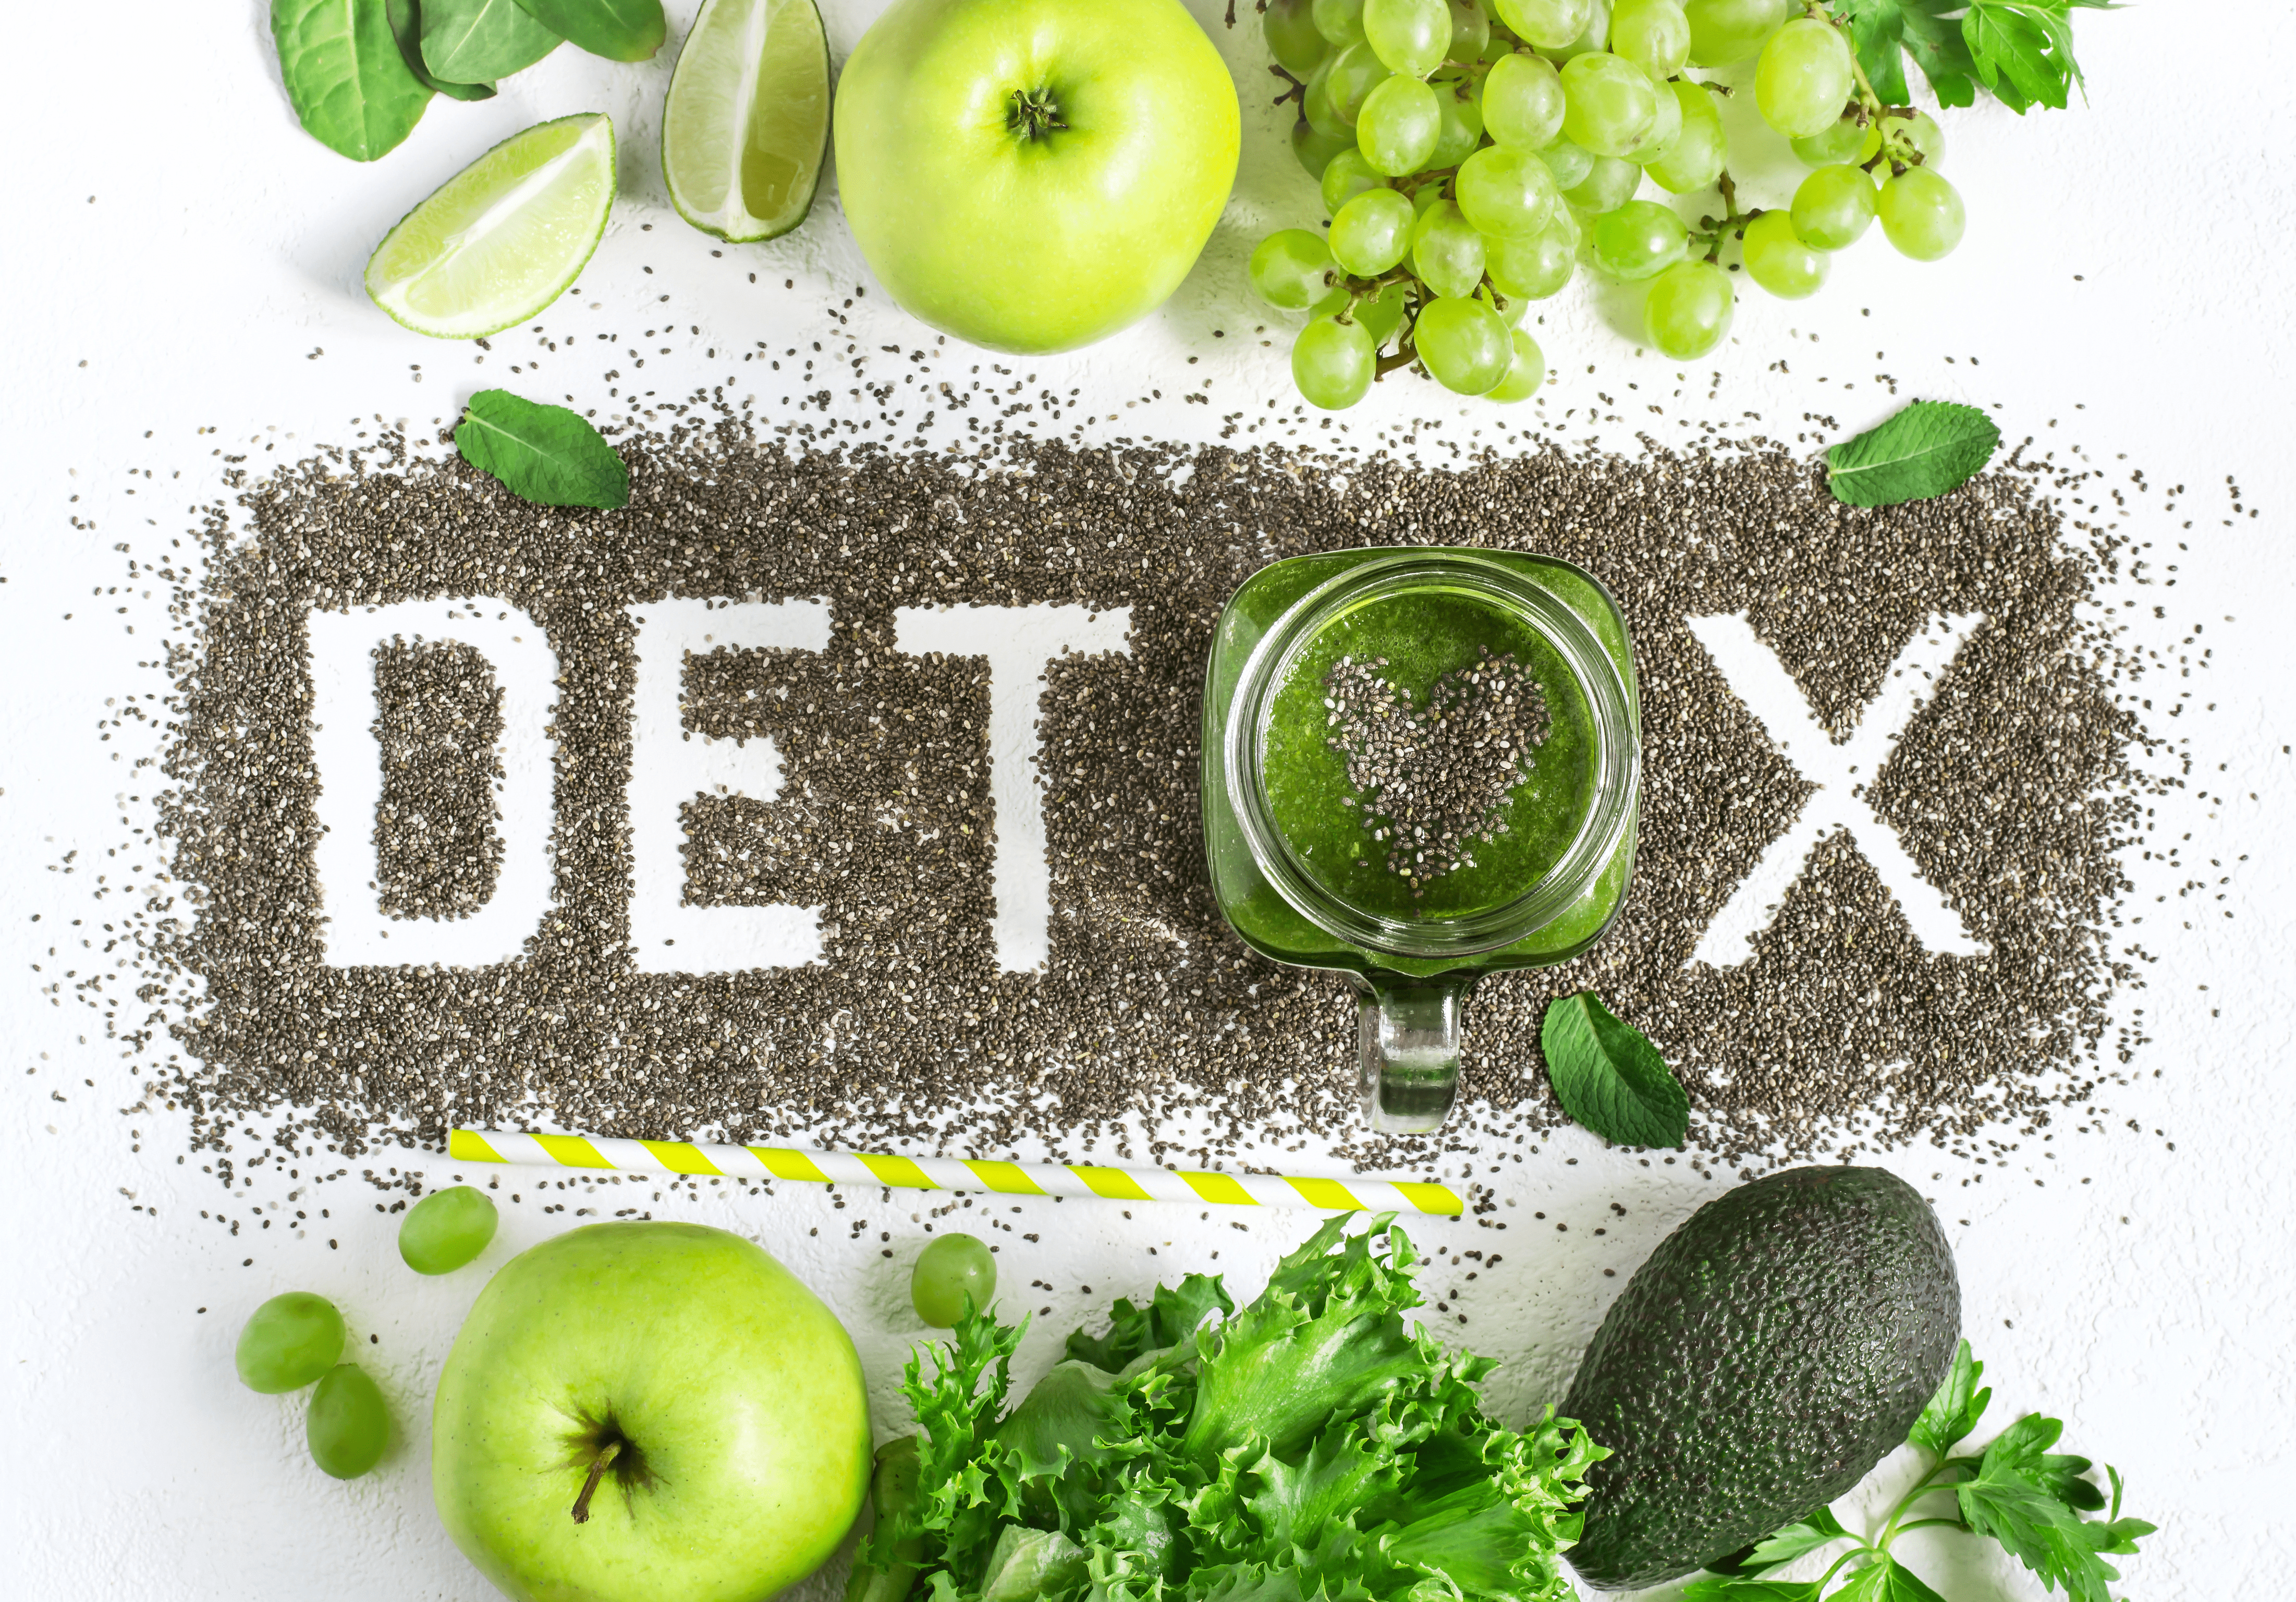 Do you know how detox works (and can supplements help)?